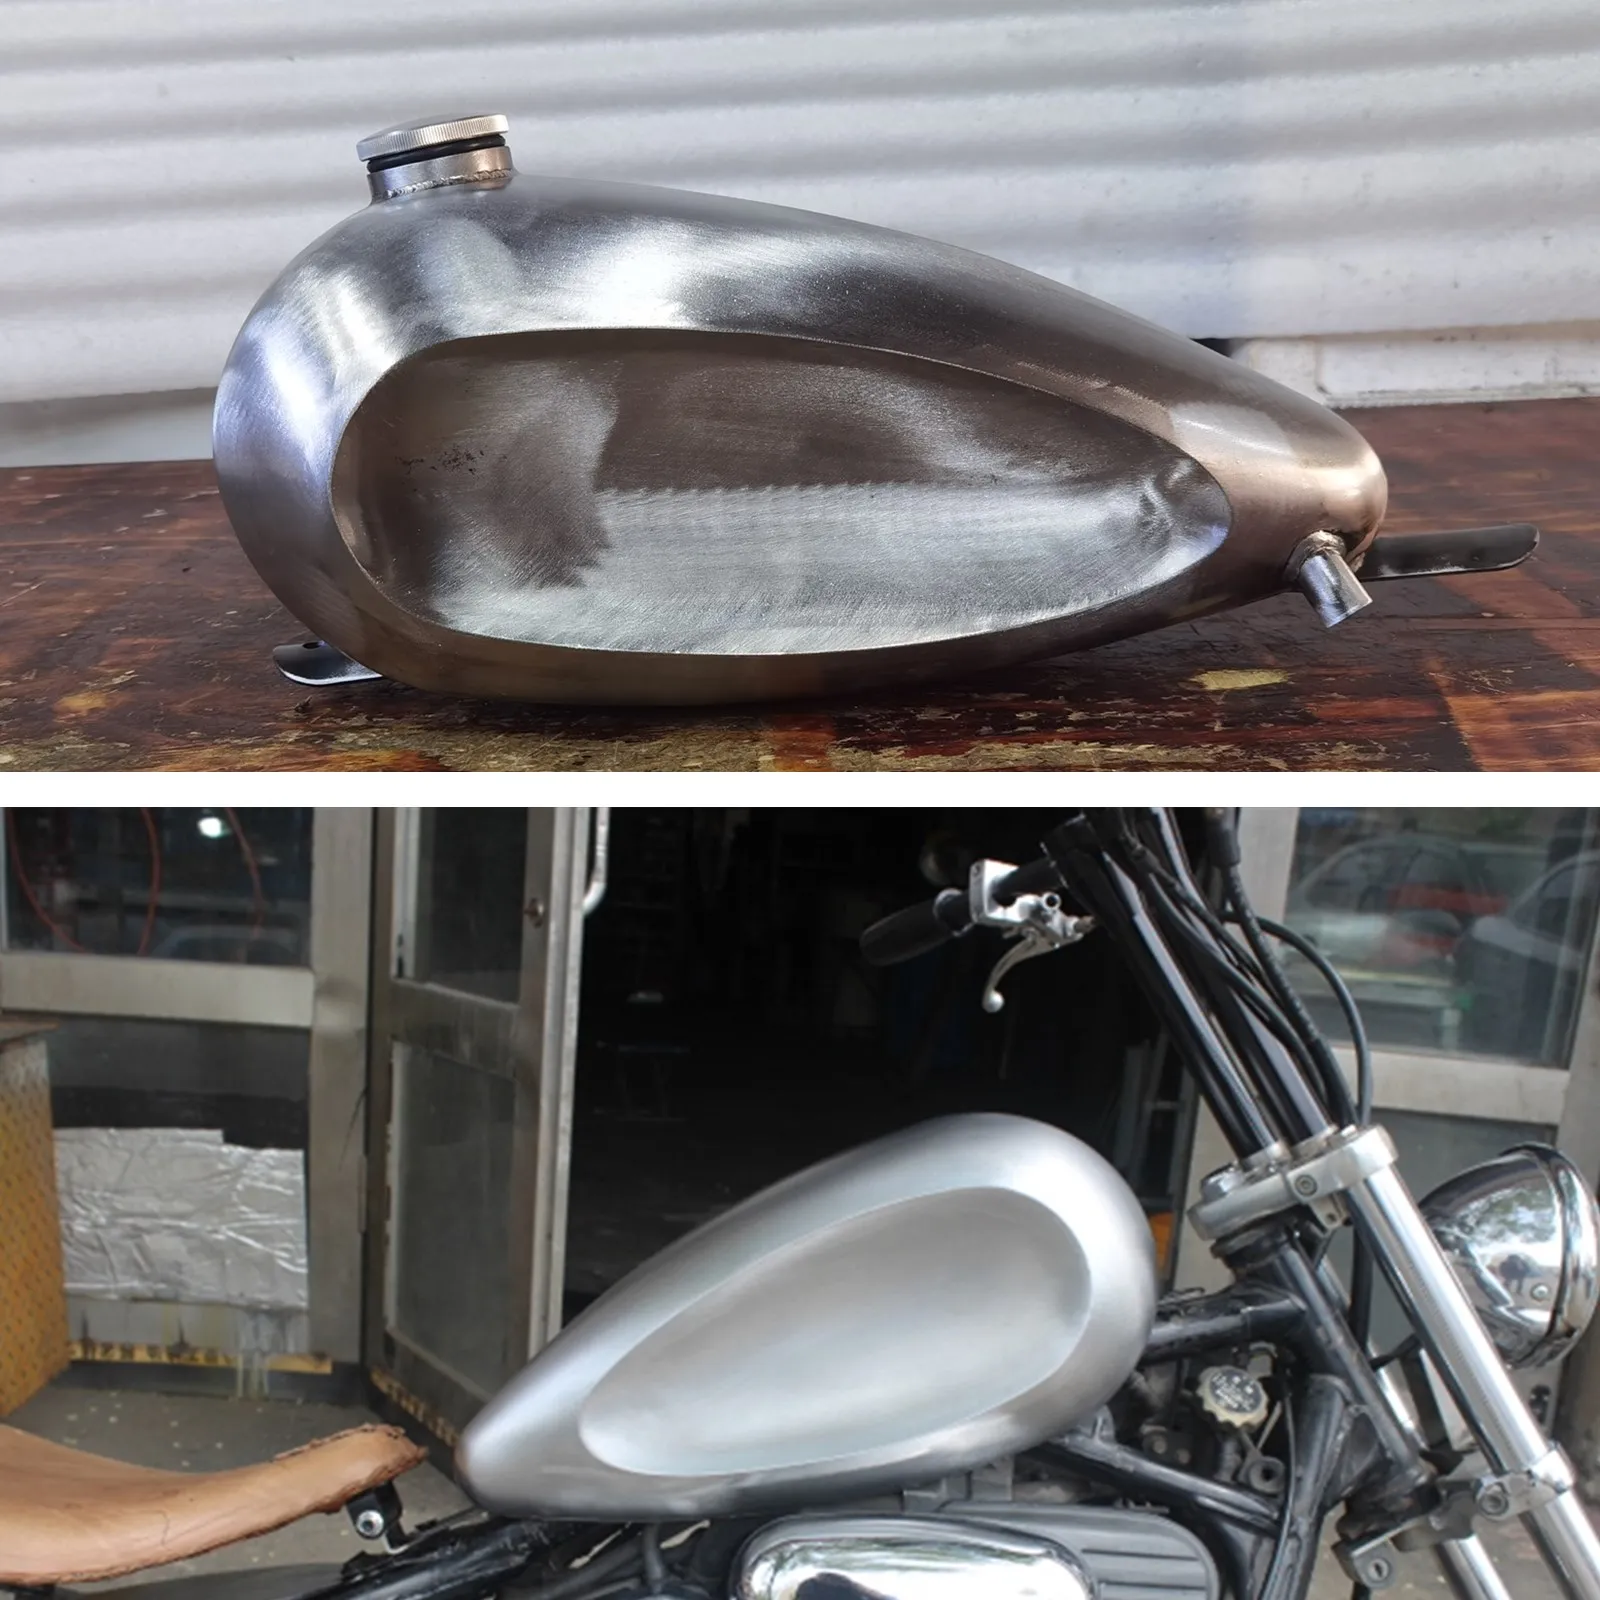 

Universal 7L Petrol Gas Oil Fuel Tank For All Motorcycle General Motorbike Handmade Modified Elding Fueling Can